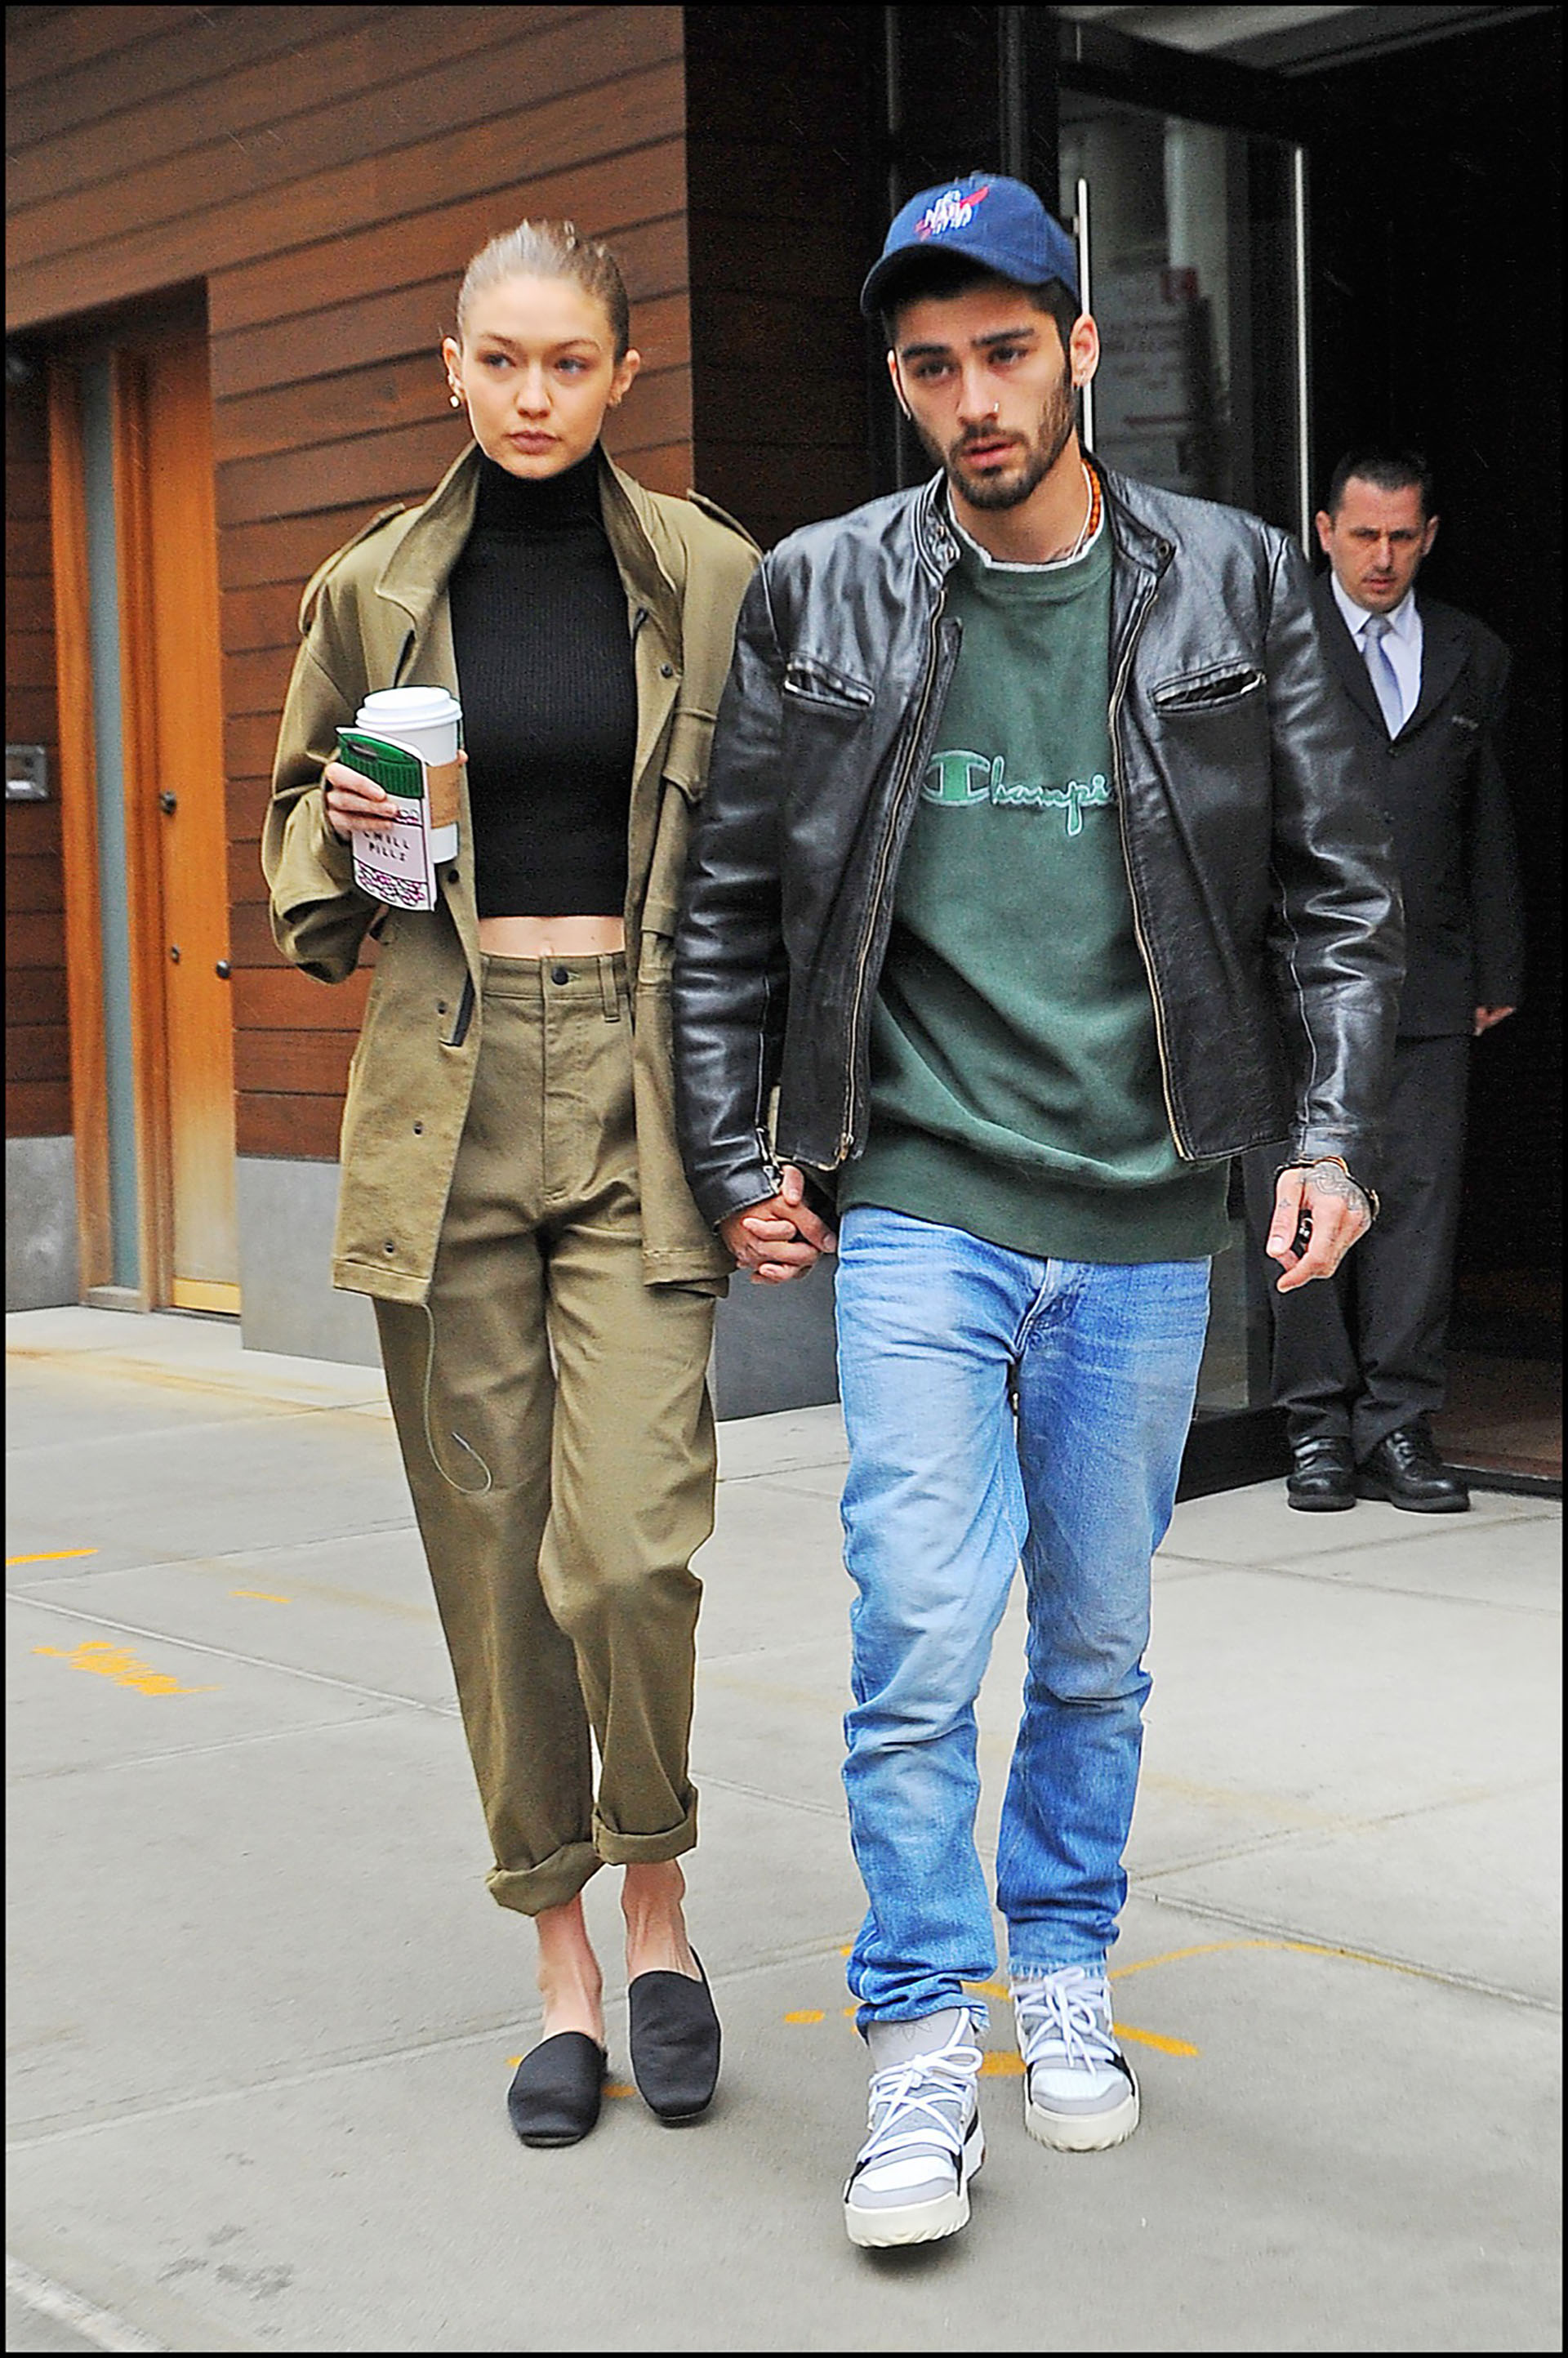 MANHATTAN, NY - APRIL 26, 2017: Gigi Hadid and Zayn Malik hold hands as they leave there Soho apartment on APRIL 26, 2017 in New York